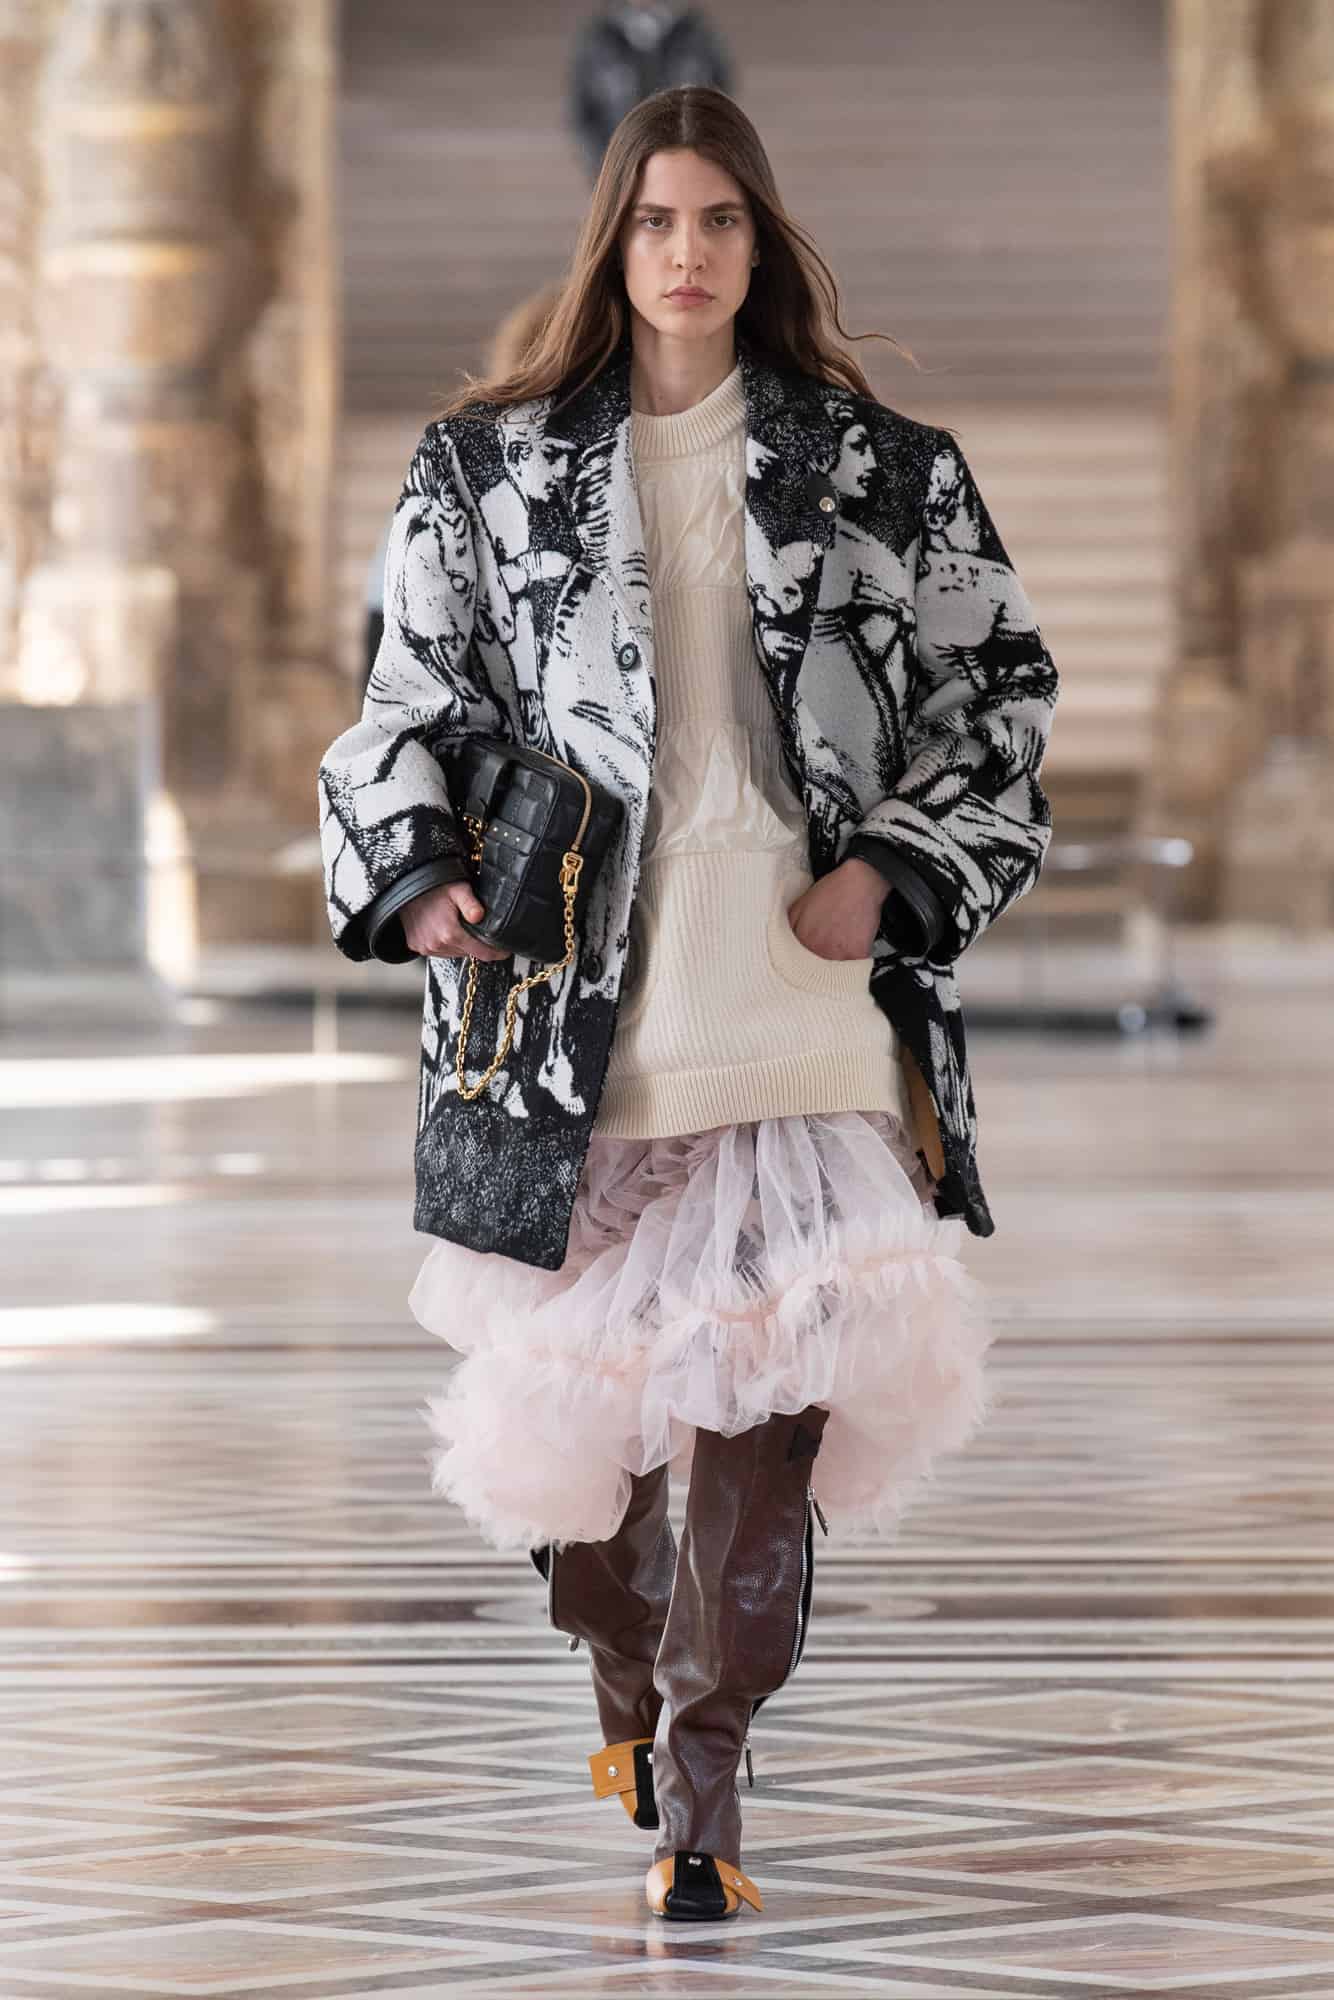 Watch: All the looks from the Louis Vuitton Fall/Winter 2021 runway